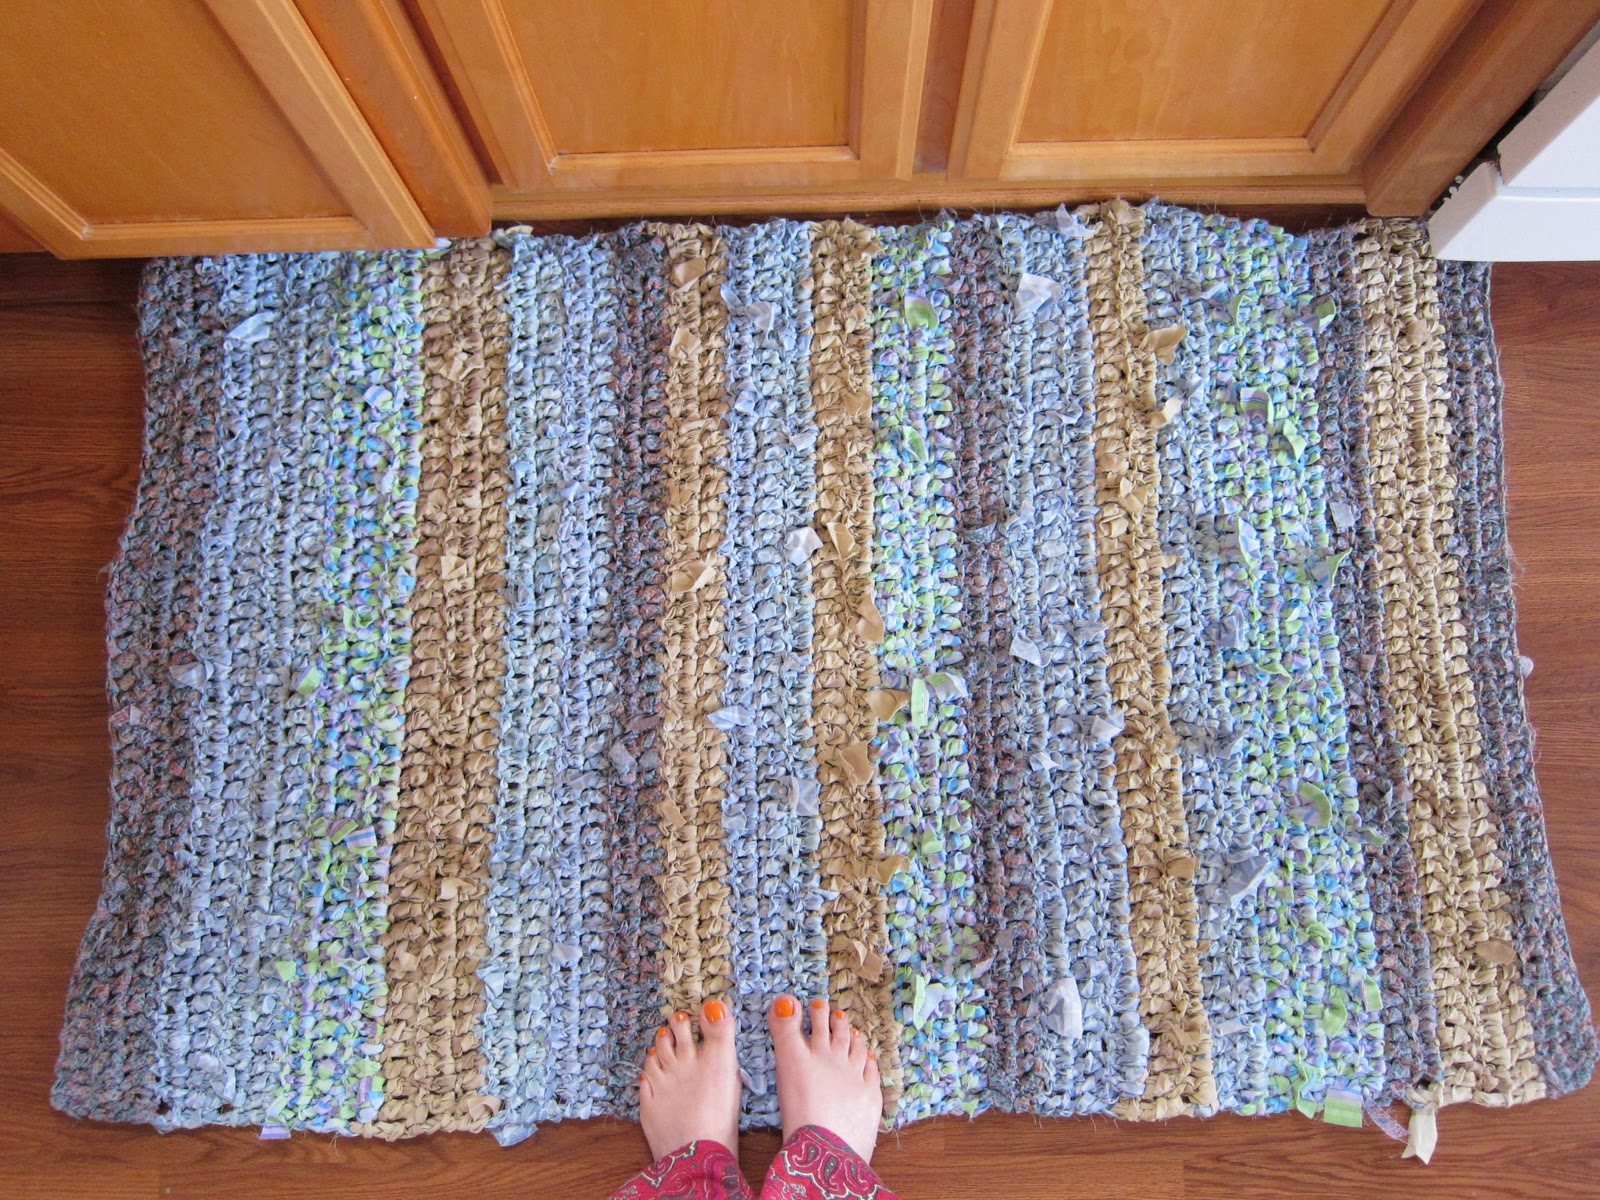 Download Thinking Out Loud: Making a Rag Rug from Old Sheets